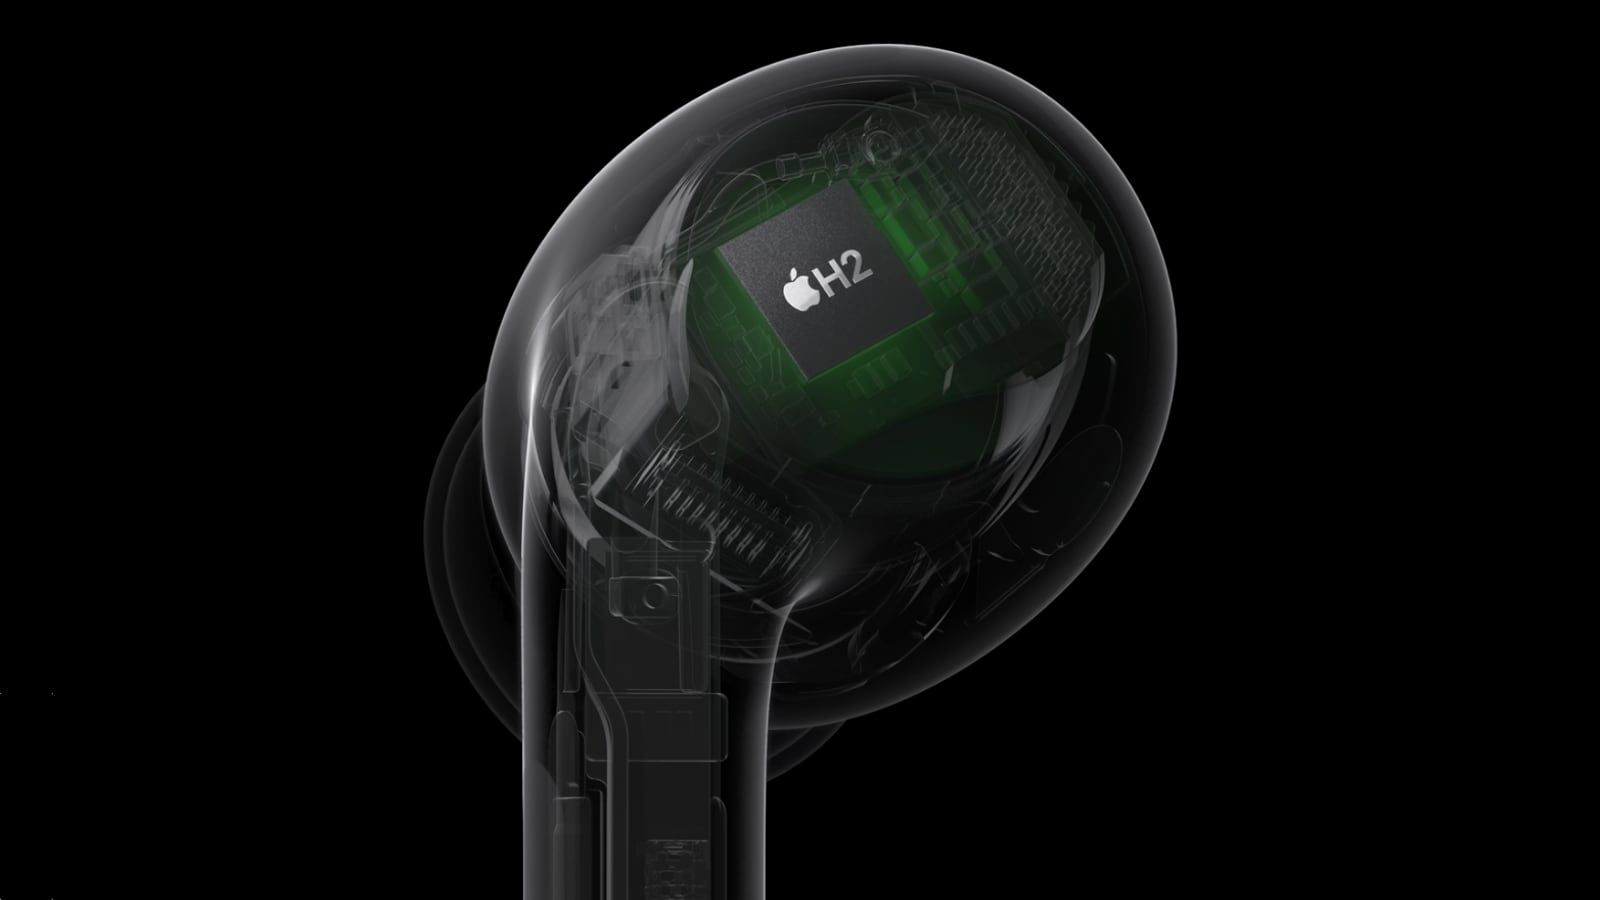 From iPhoneIslam.com The transparent AirPods 4 reveal a subtle green internal chip bearing the Apple logo, against a black background.